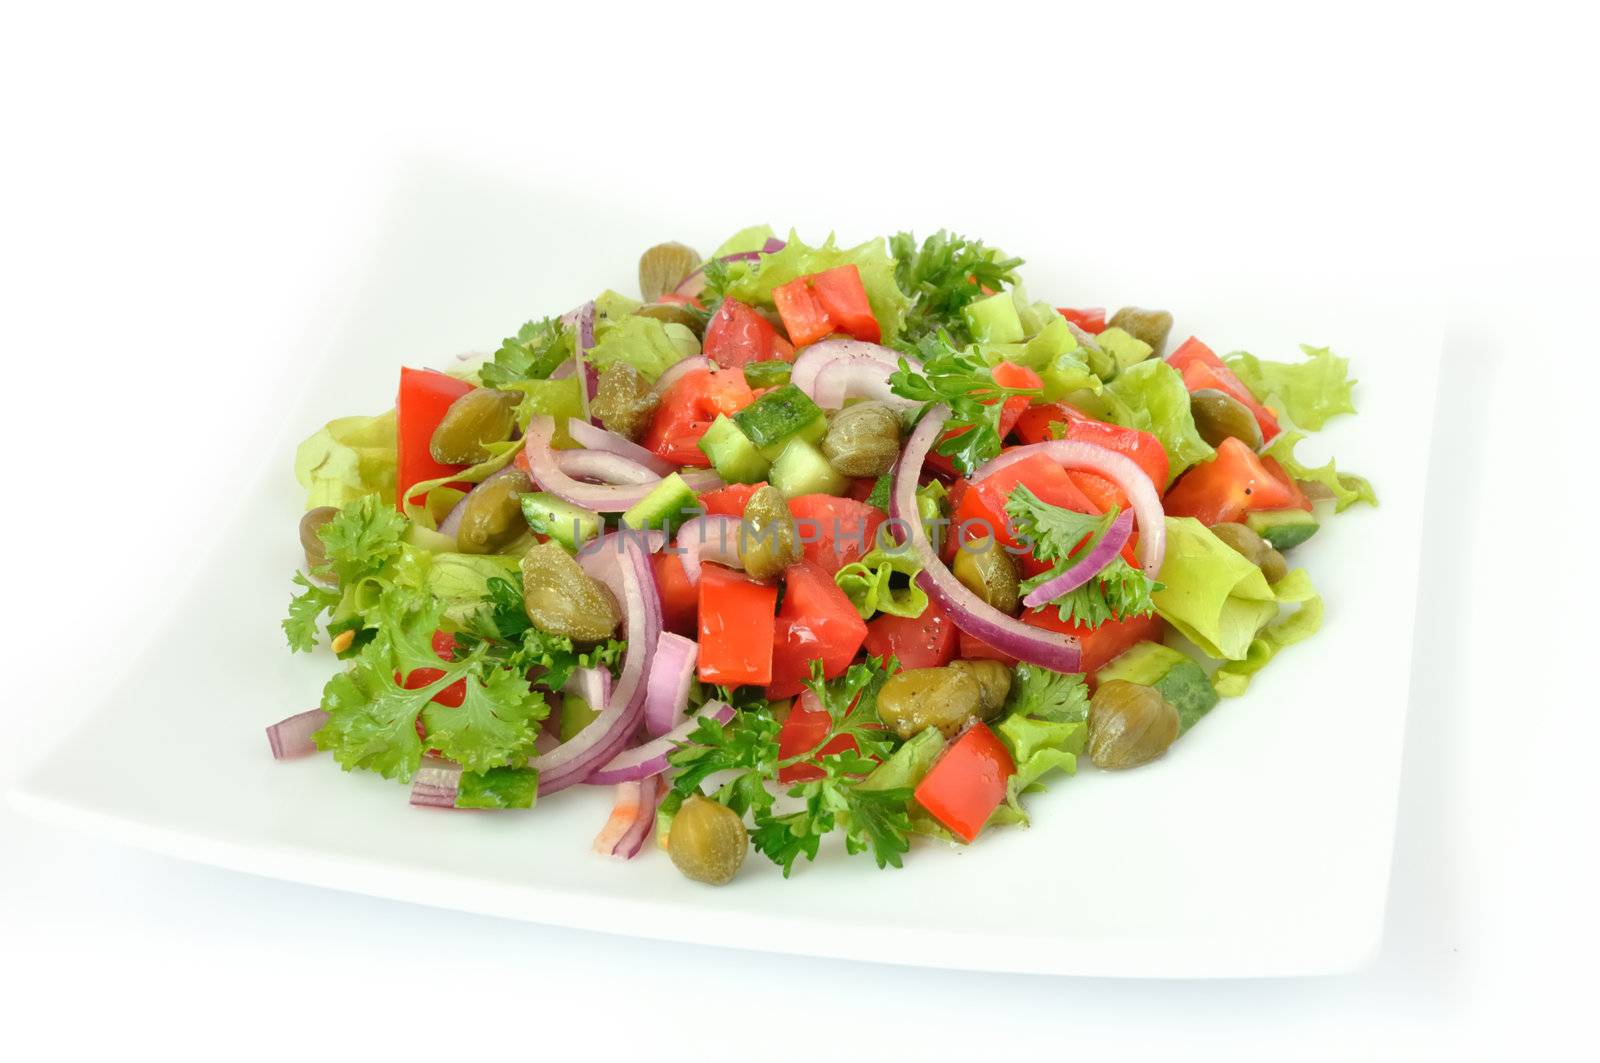 Vegetable salad with capers and herbs close	